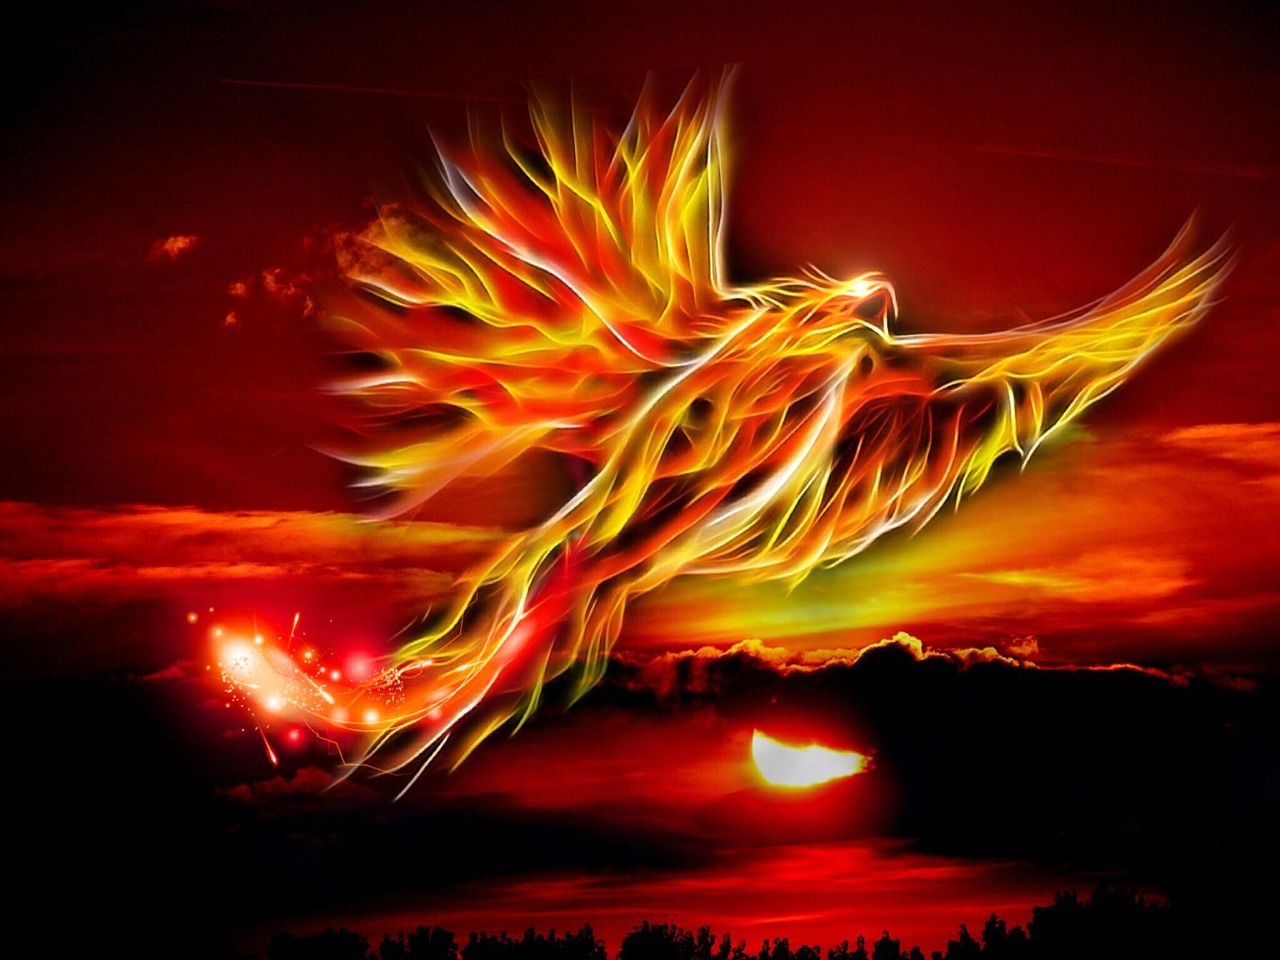 a painting of a bird flying in the sky, digital art, by Eugeniusz Zak, tumblr, digital art, phoenix in fire, (fire), fire beam, red and orange colored